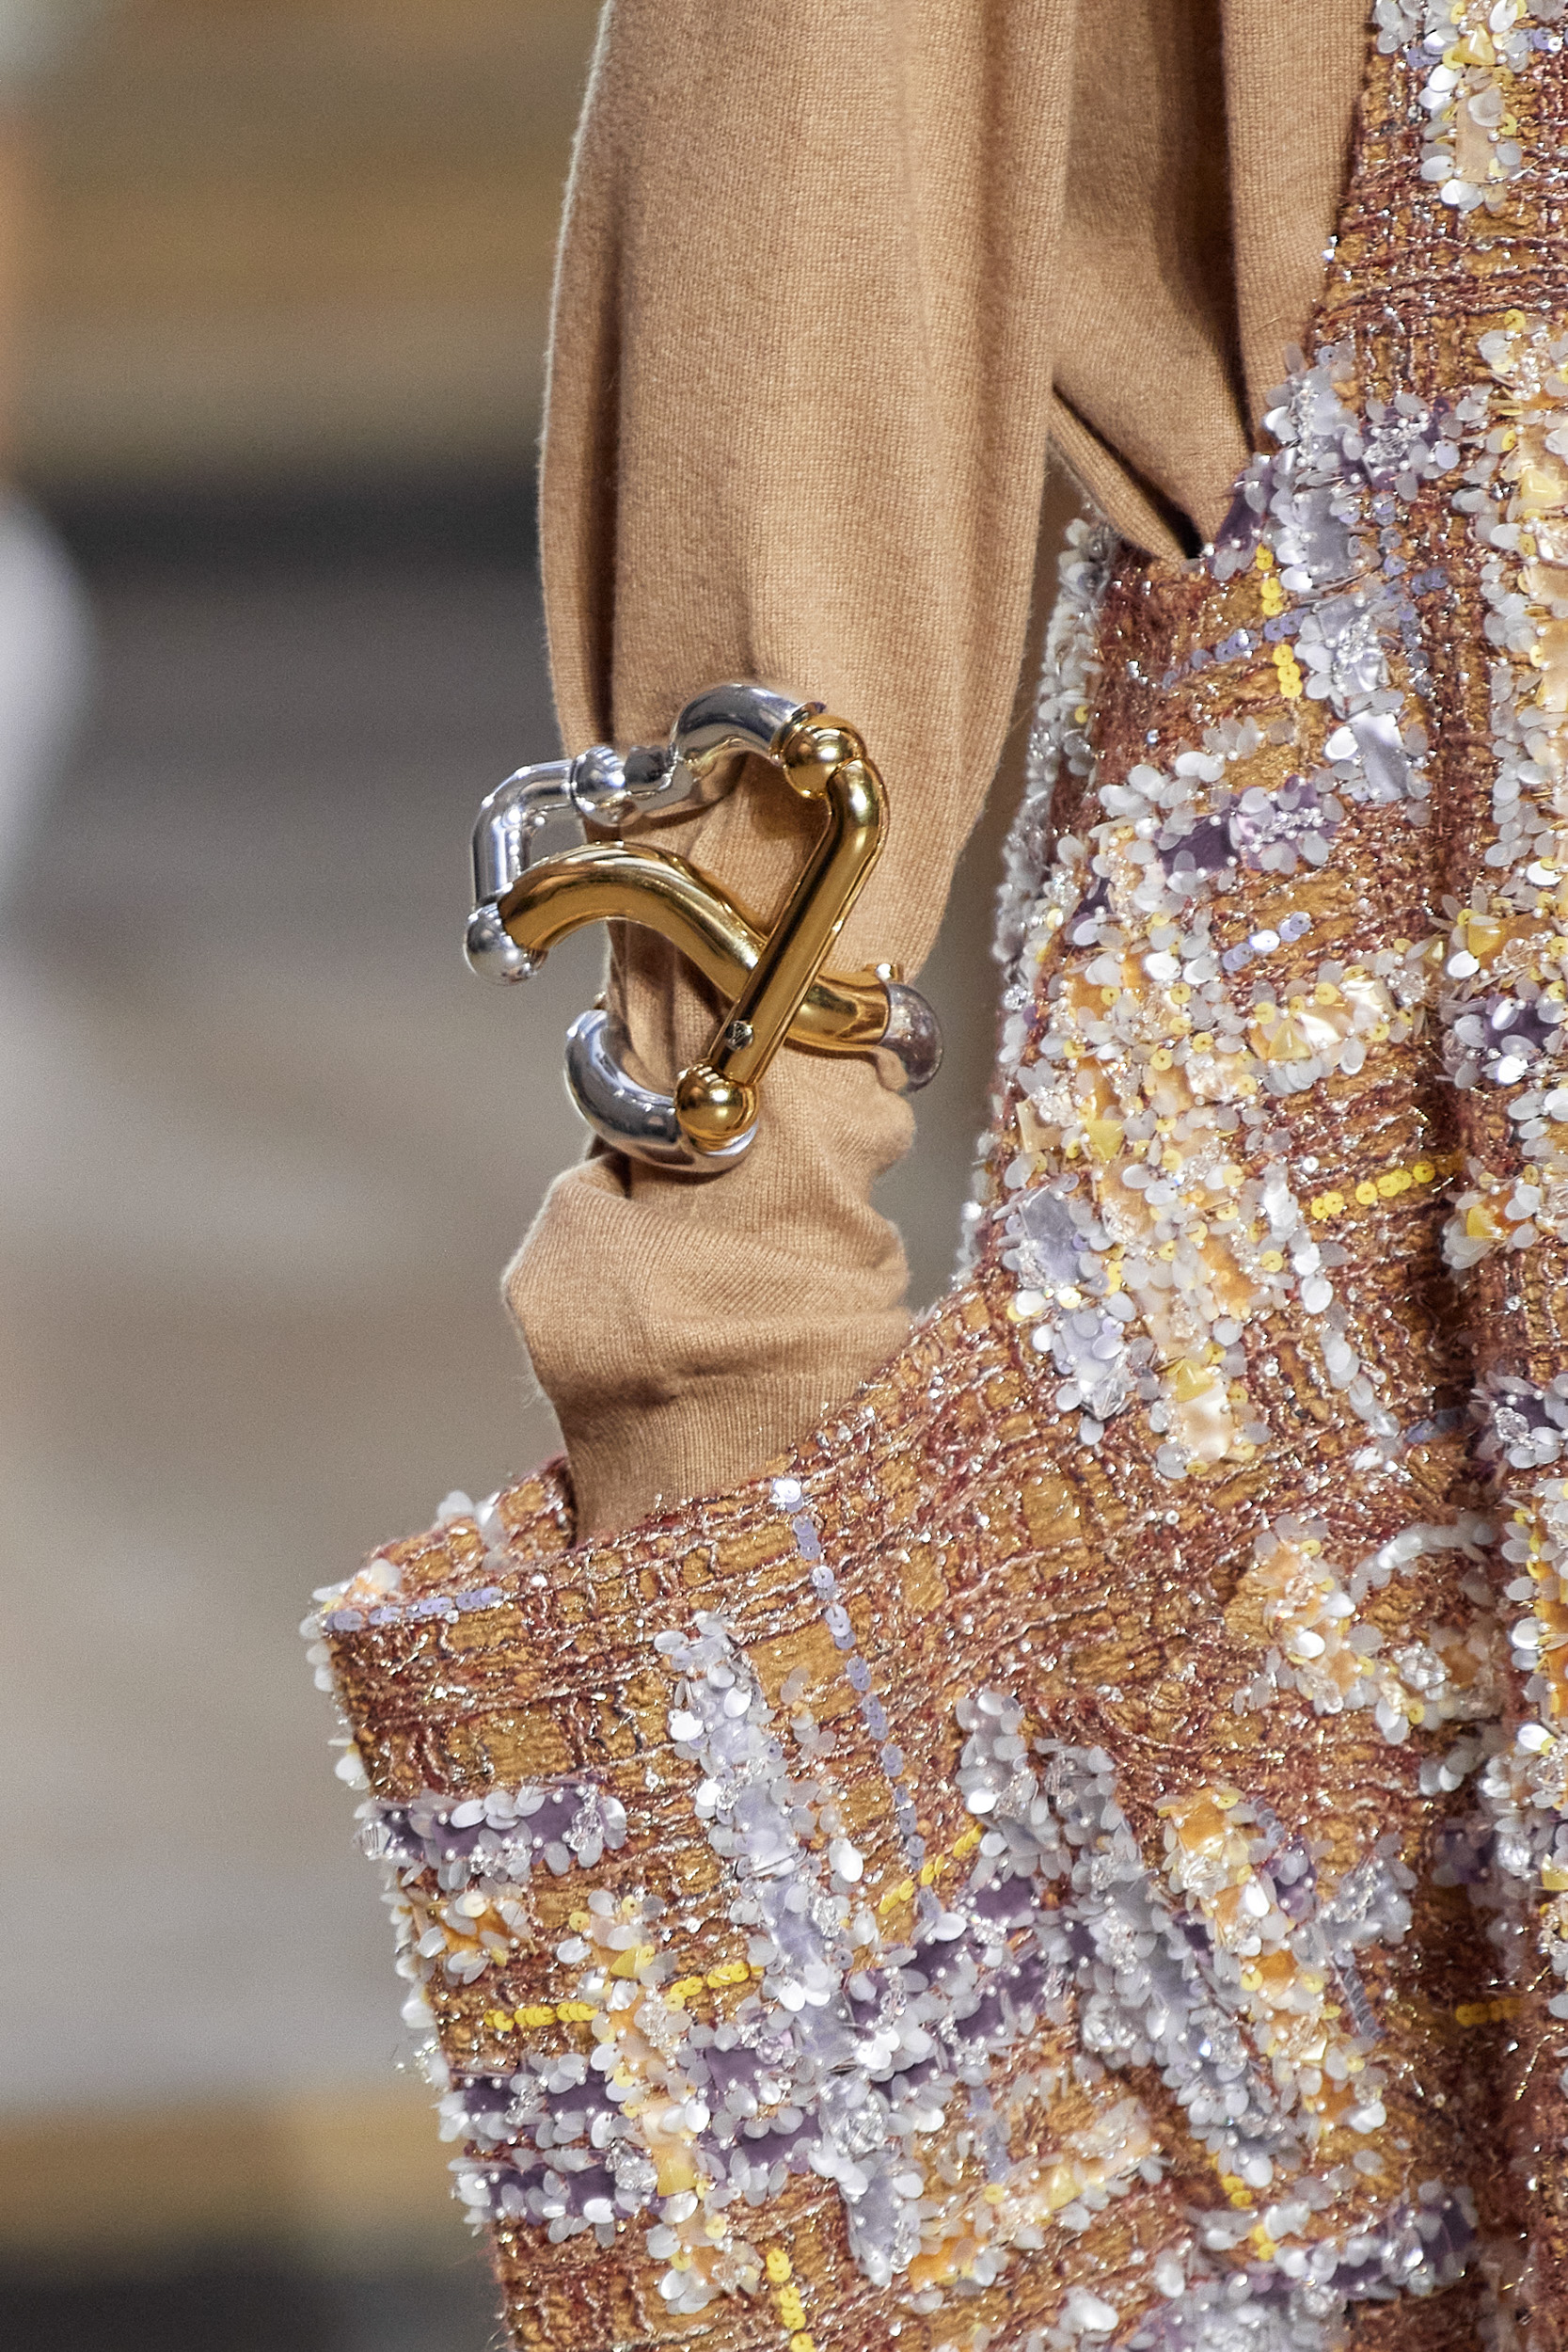 Jewelry Details from Louis Vuitton Fall 2022 Menswear show